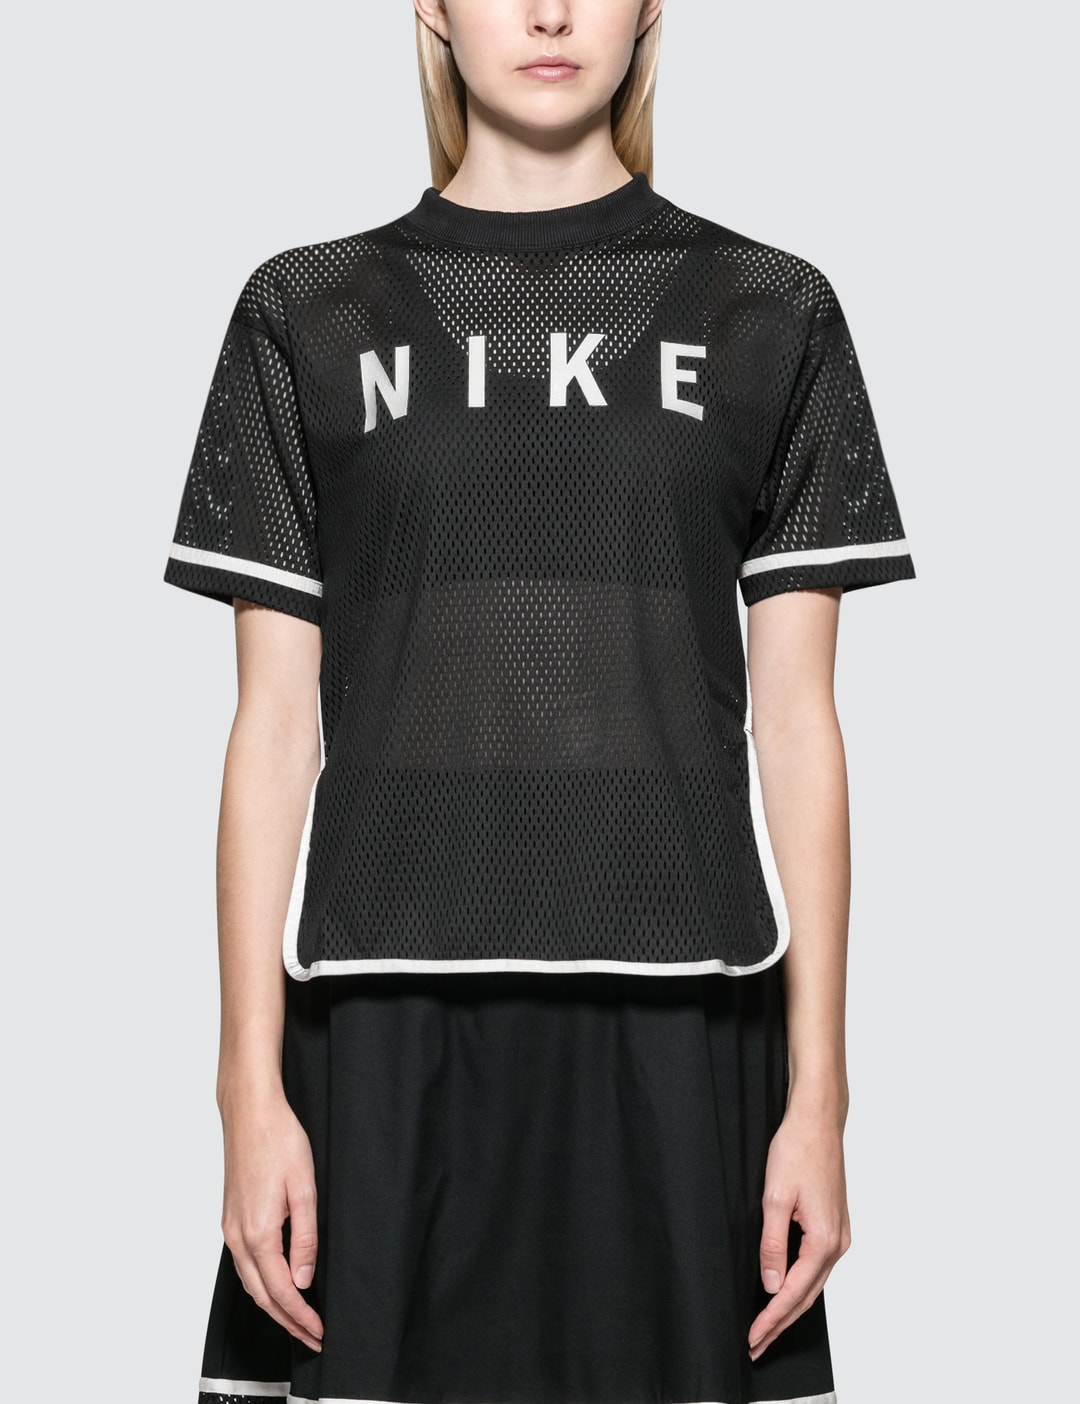 Nike - Nsw S/S Mesh T-Shirt | HBX - Globally Curated Fashion and ...